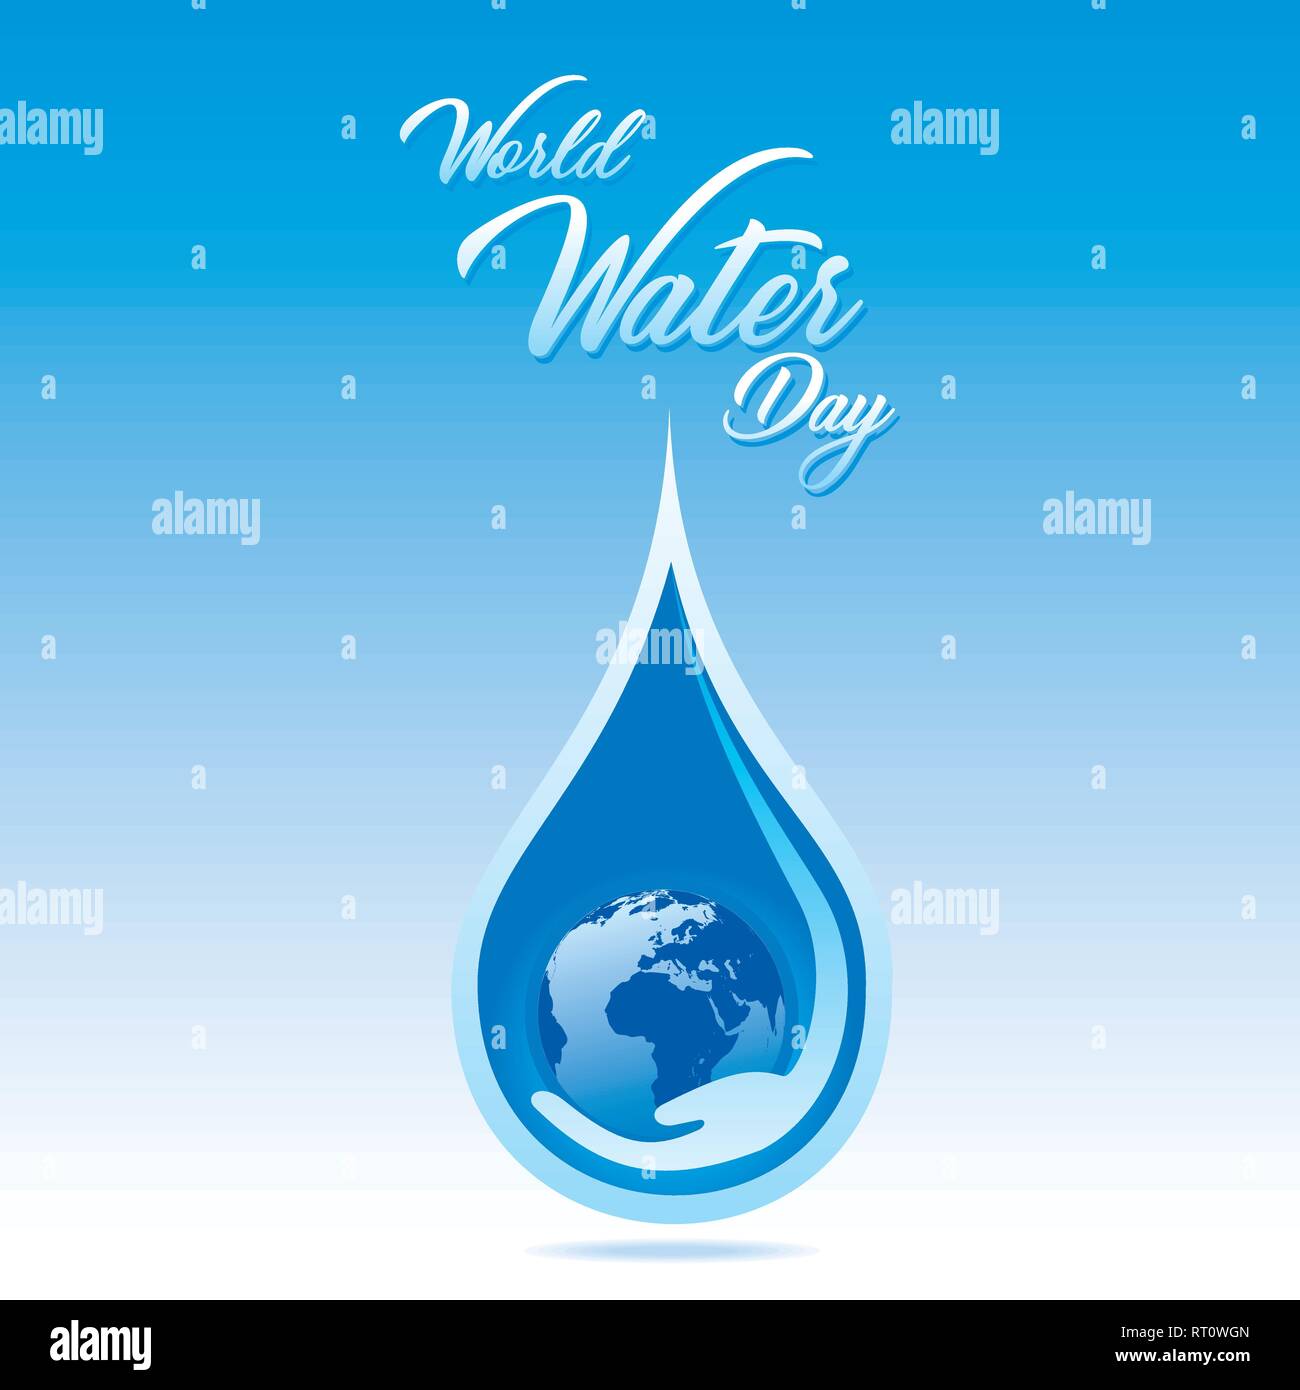 creative world water day poster or banner design Stock Vector Image ...